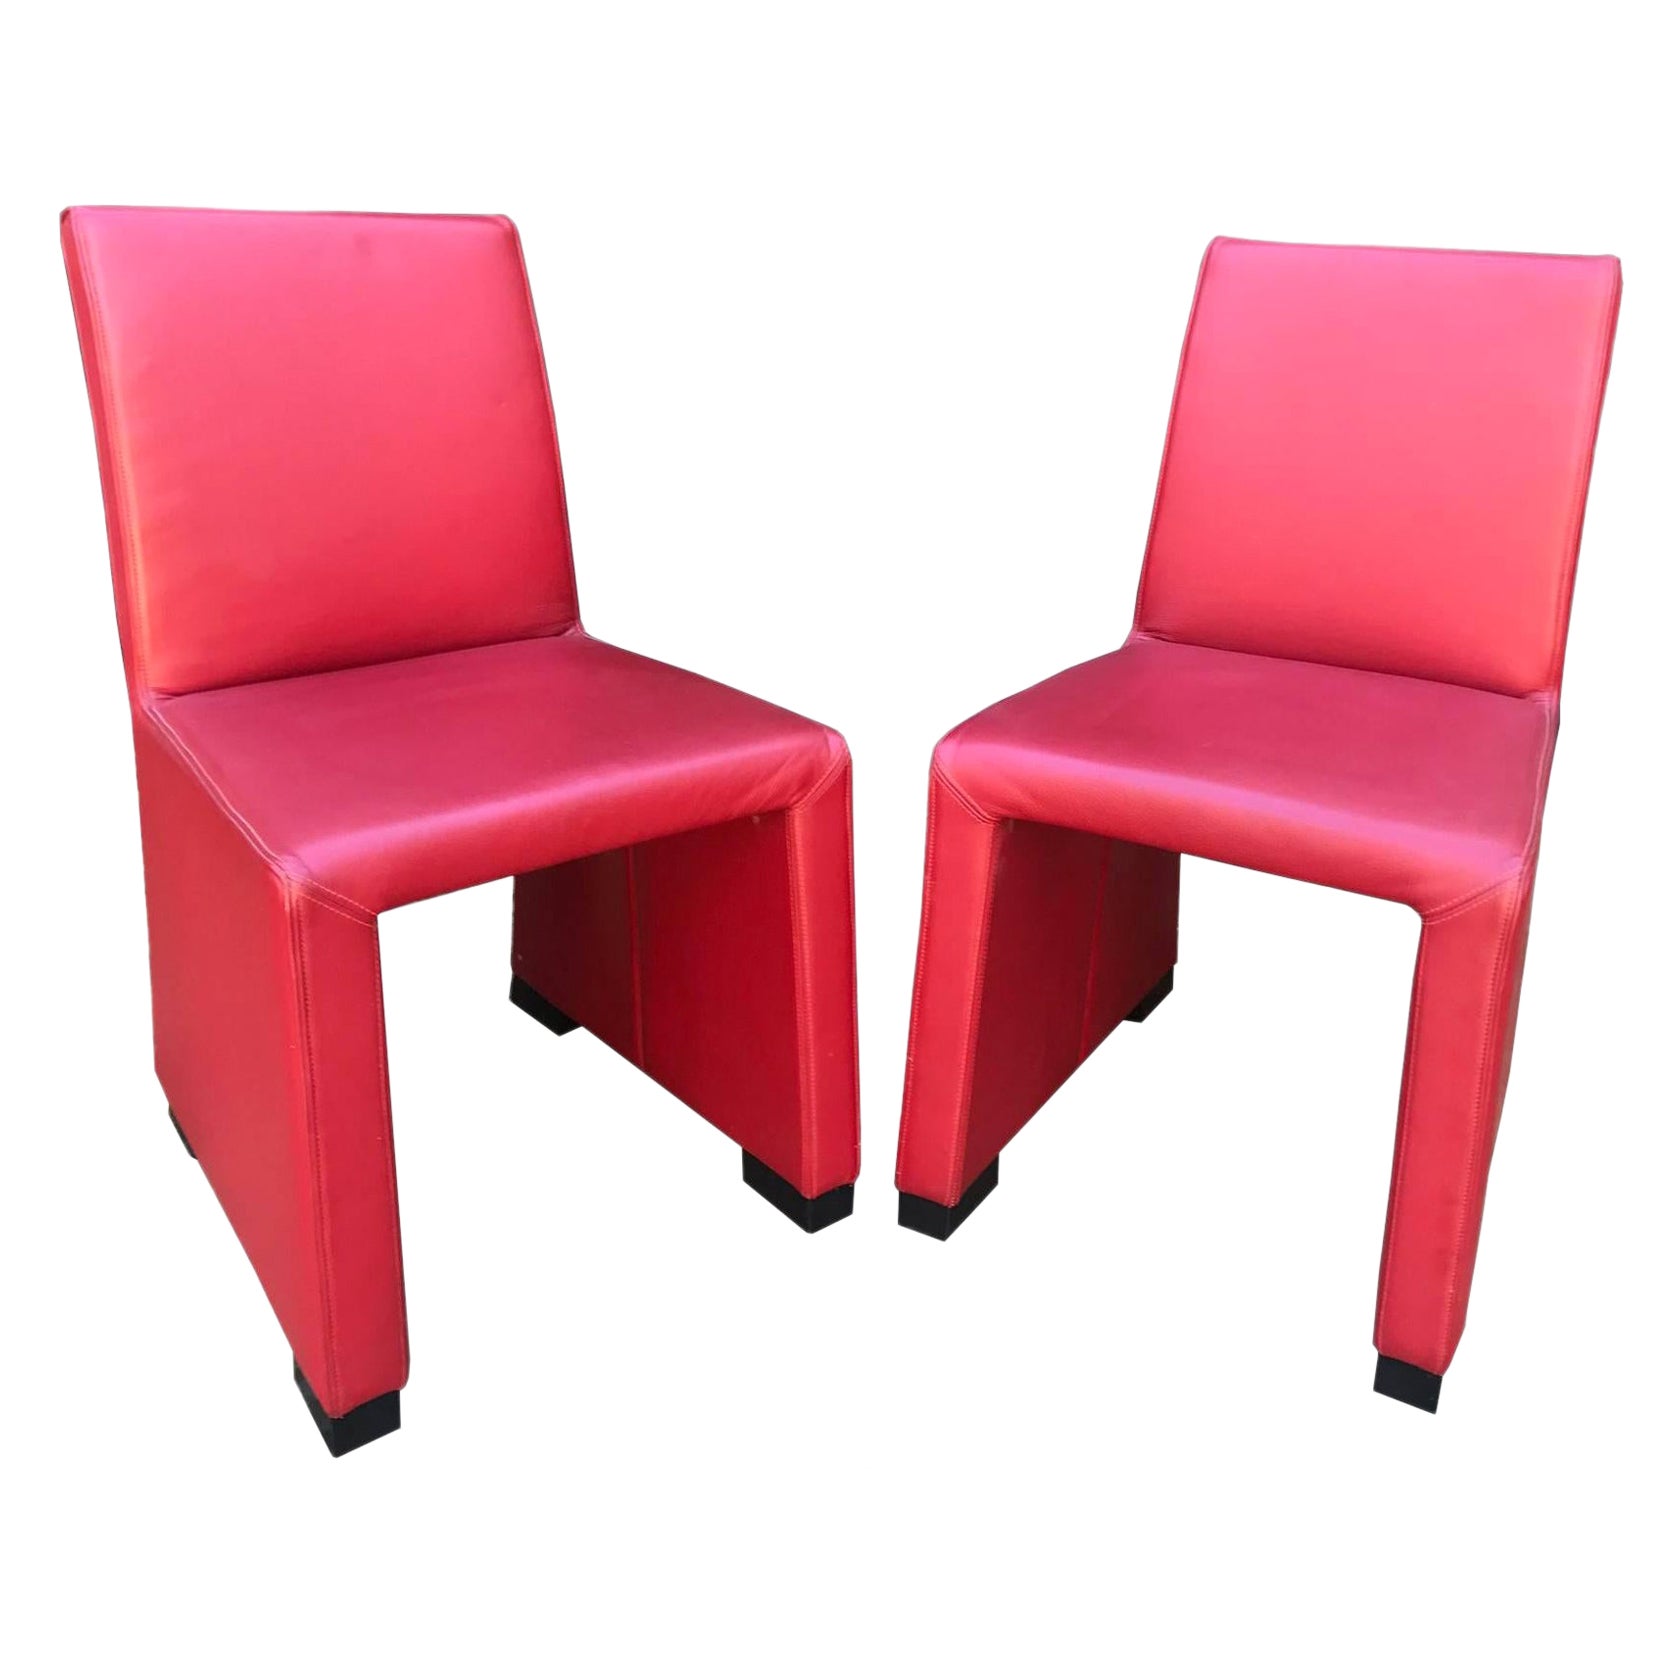 1980s Wittmann's Austrian Red Leather Chairs For Sale